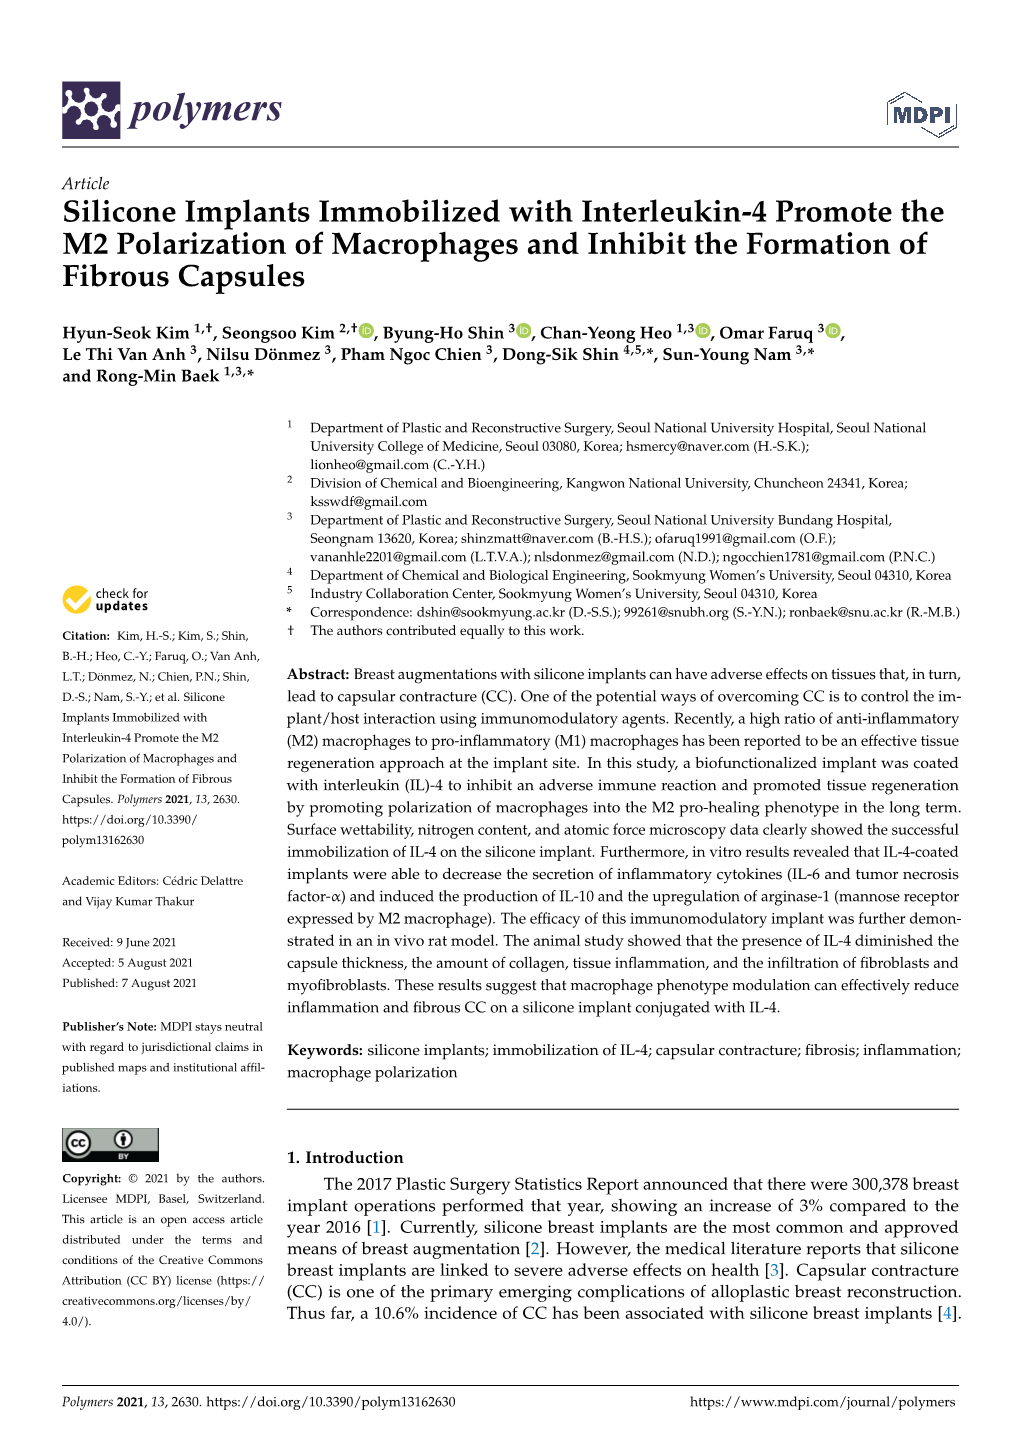 Silicone Implants Immobilized with Interleukin-4 Promote the M2 Polarization of Macrophages and Inhibit the Formation of Fibrous Capsules